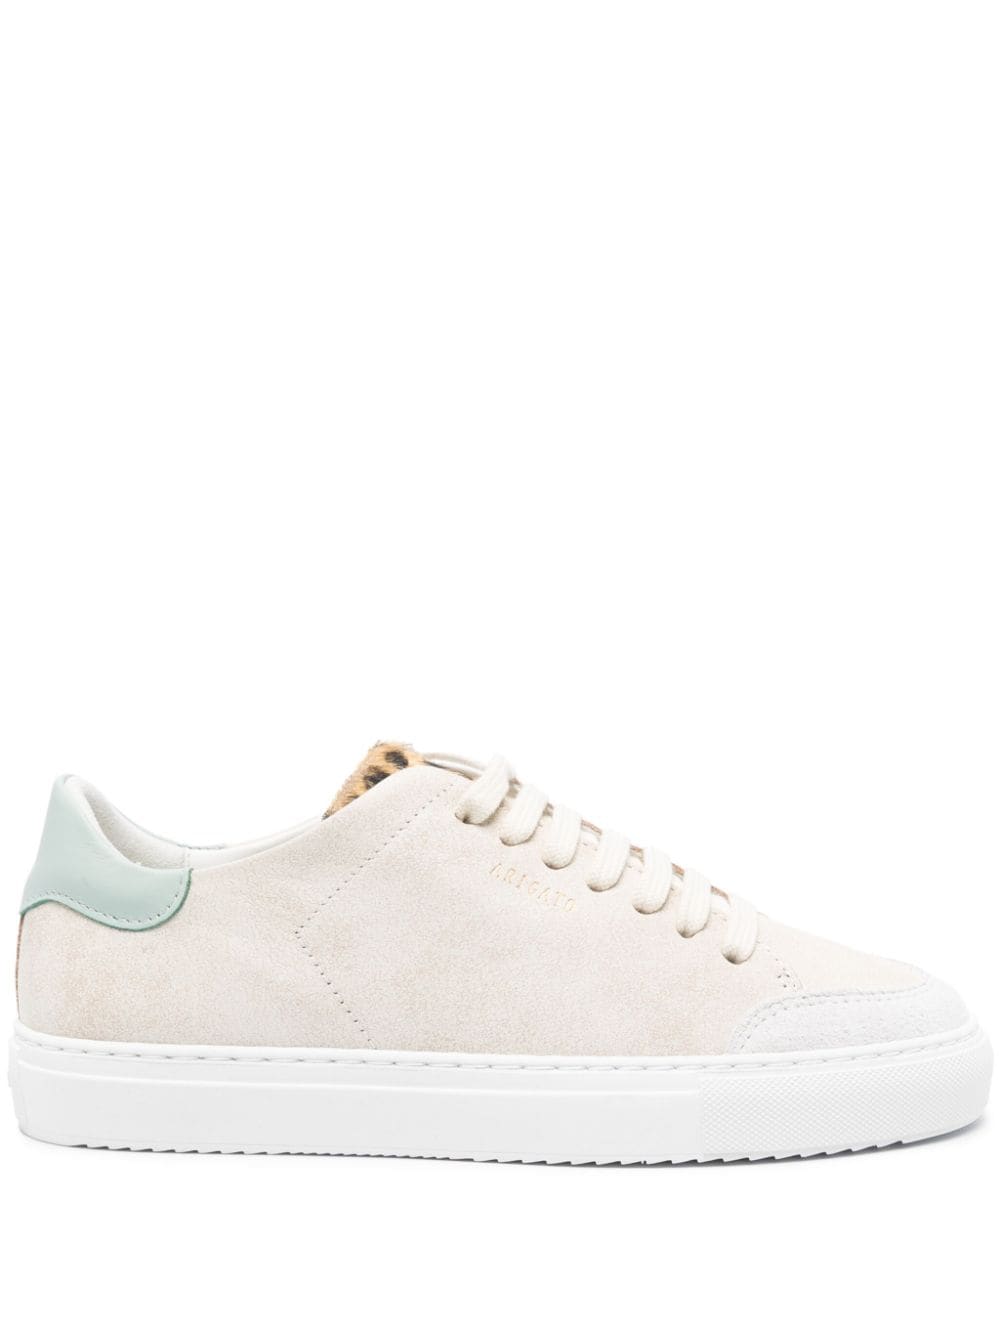 Axel Arigato Clean 90 Leather Trainers In Neutrals